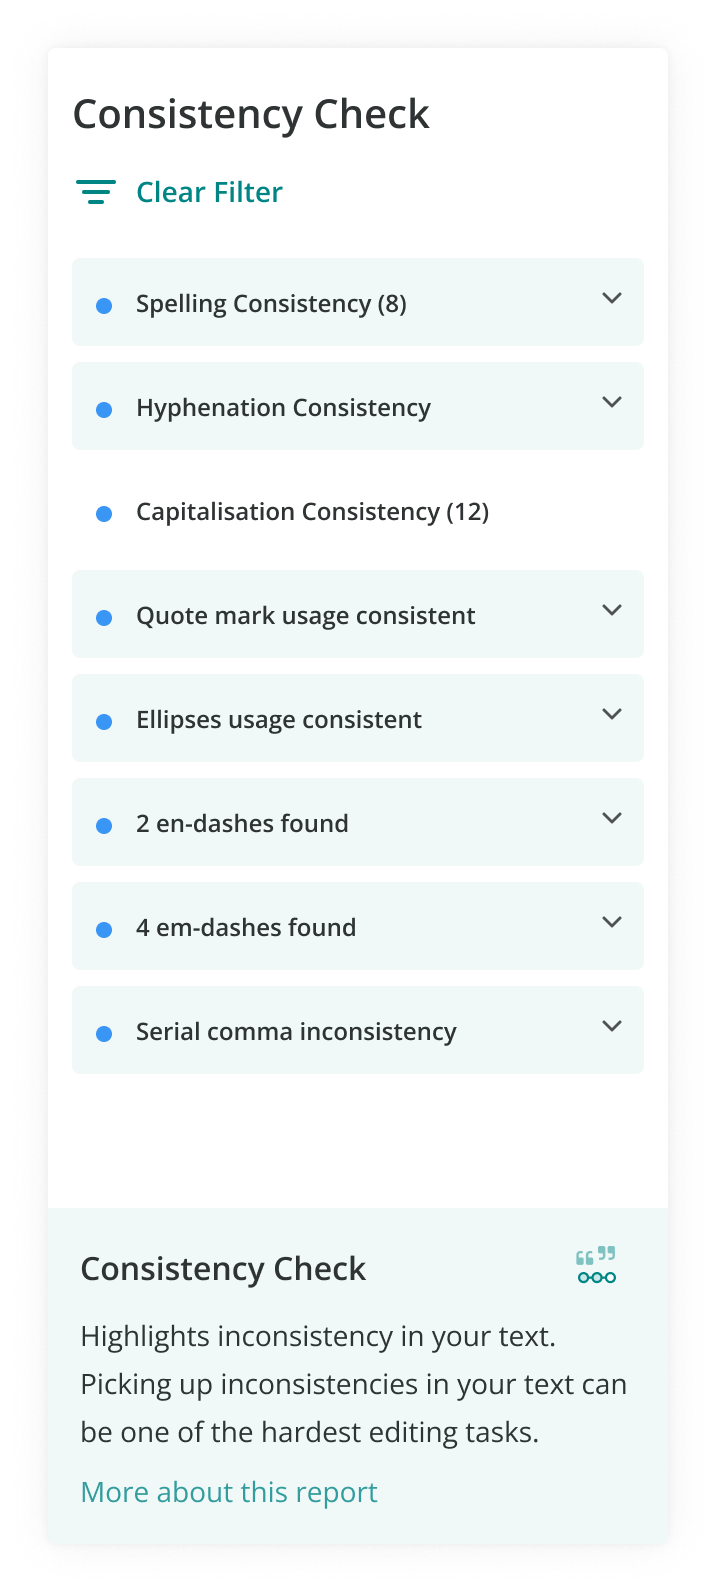 ProWritingAid's Consistency check detecting serial comma inconsistency